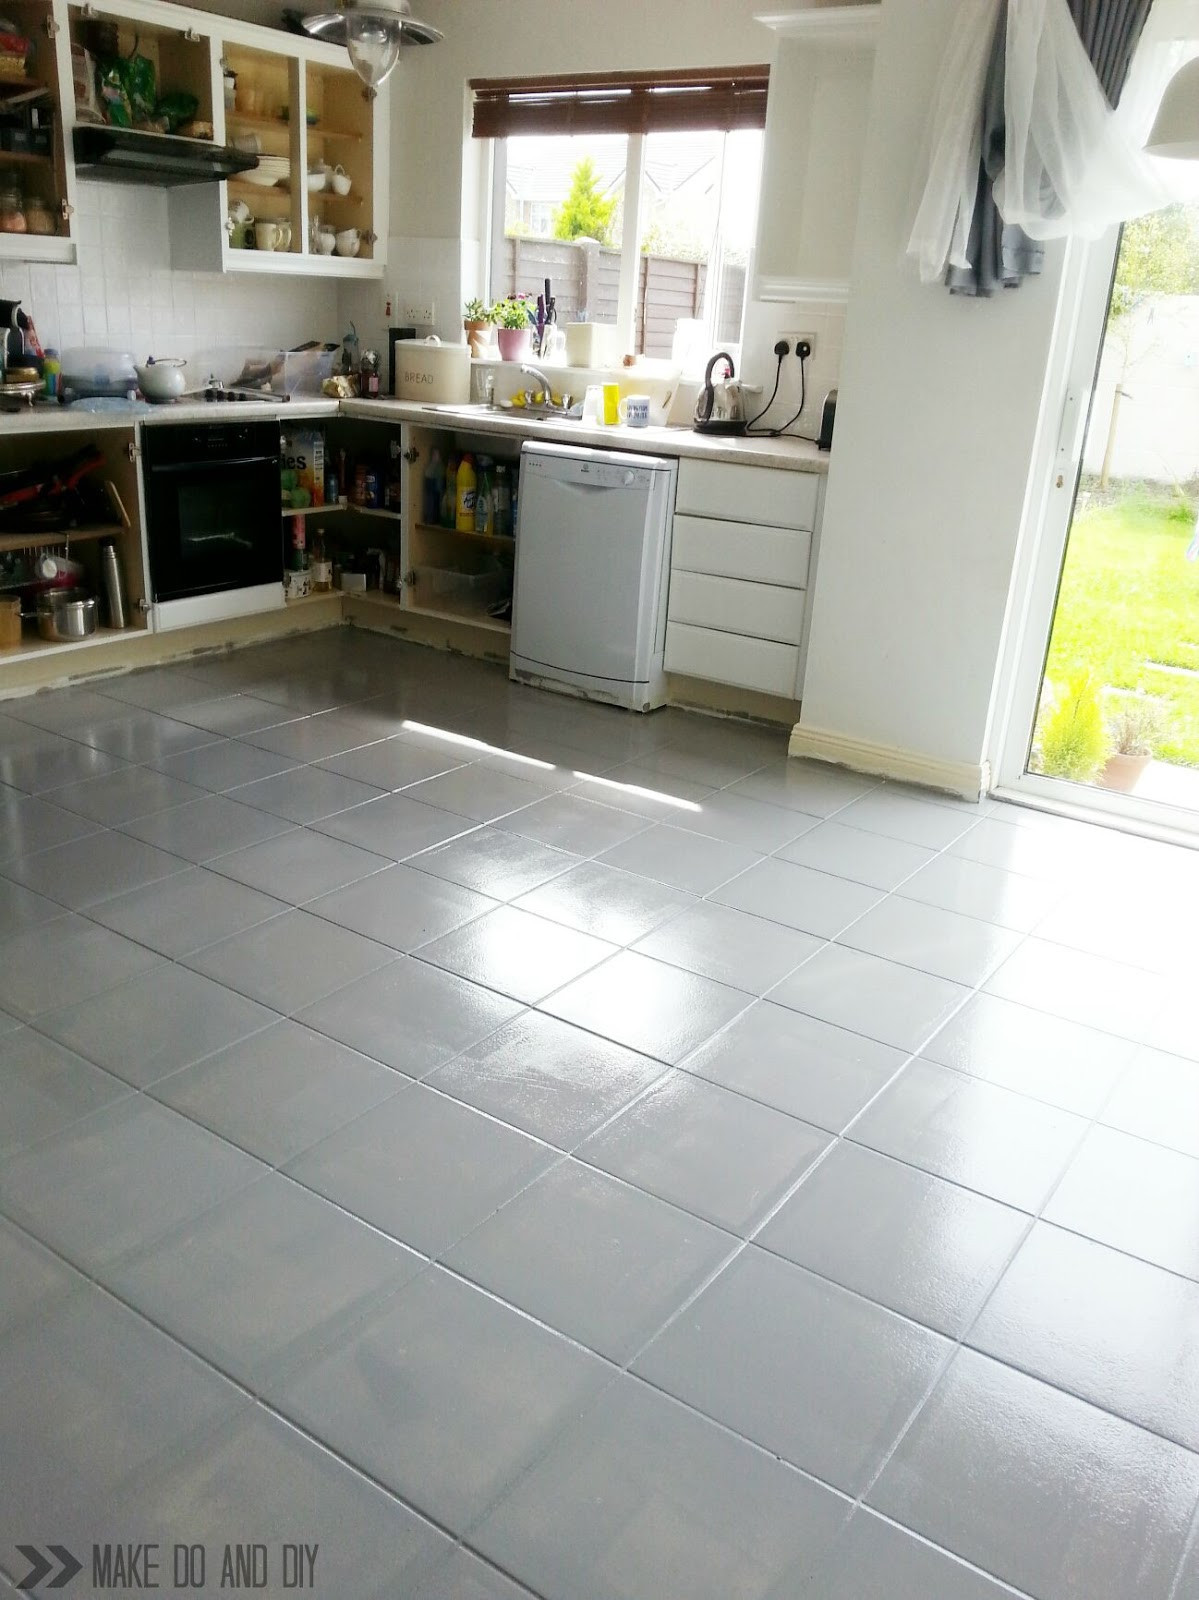 Painted Kitchen Floor Tiles
 painted tile floor no really Make Do and DIY